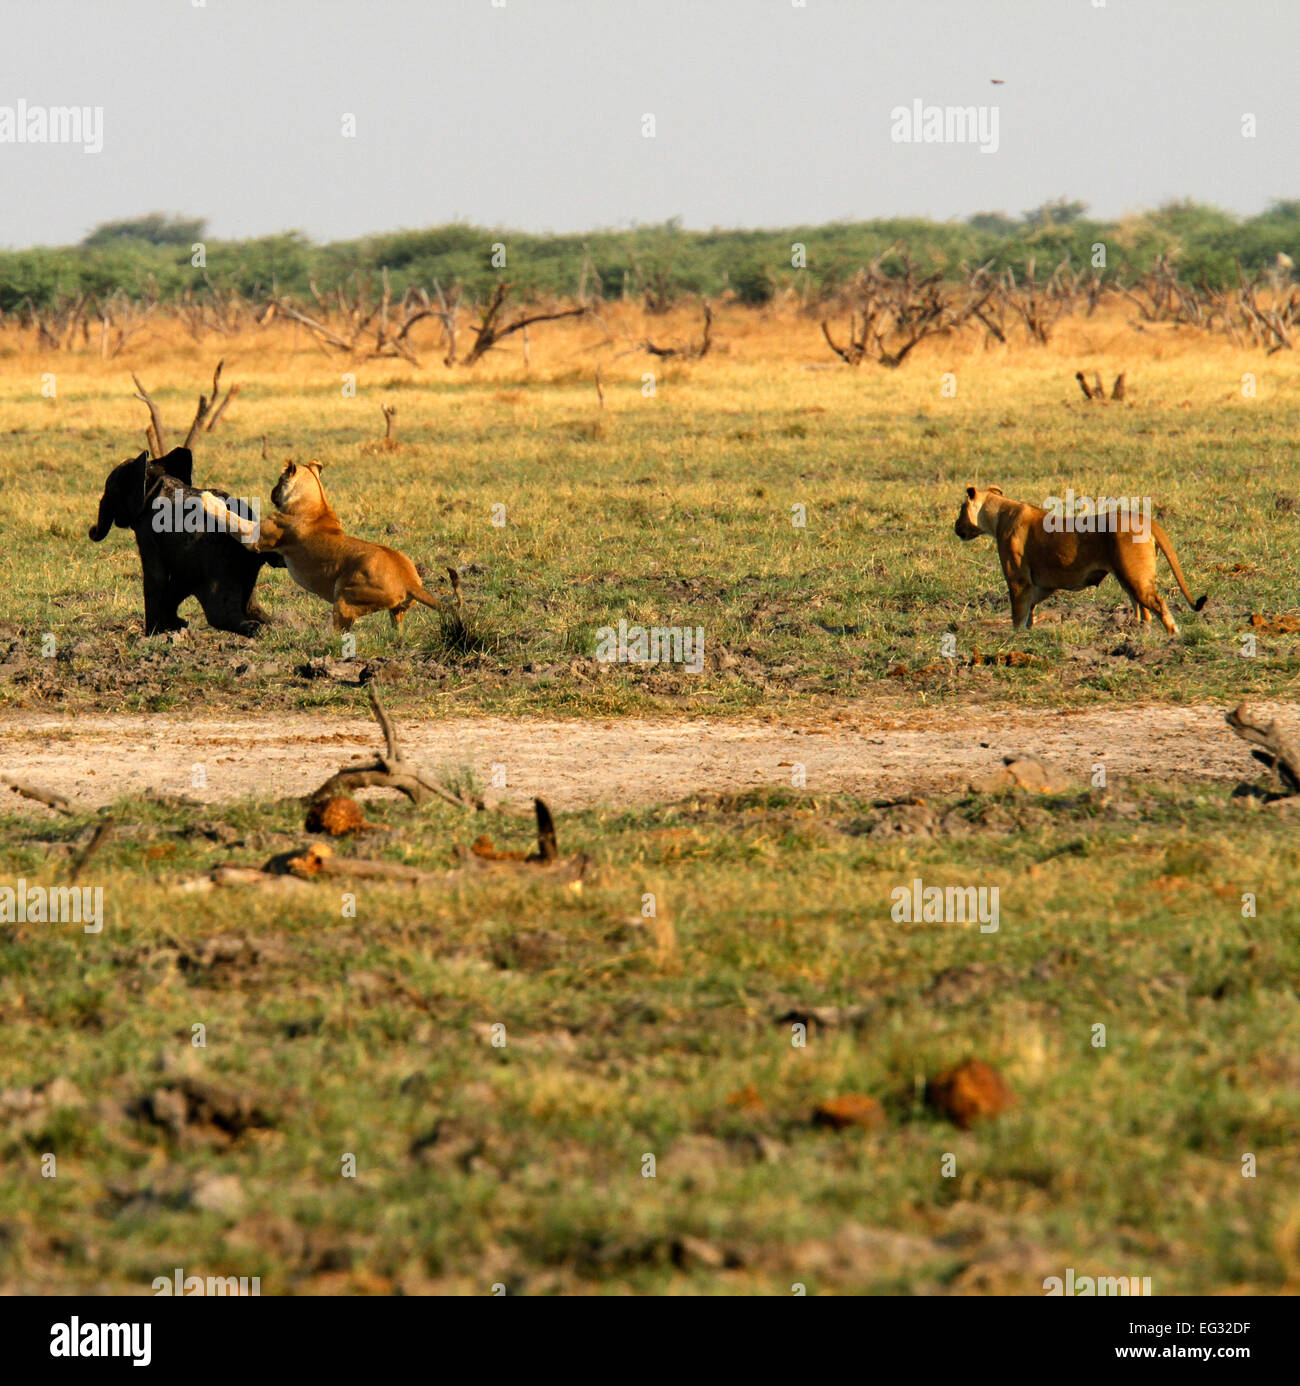 African lion jumping on the back of a tiny baby elephant during an attack both in hunting mode needing to feed their family Stock Photo